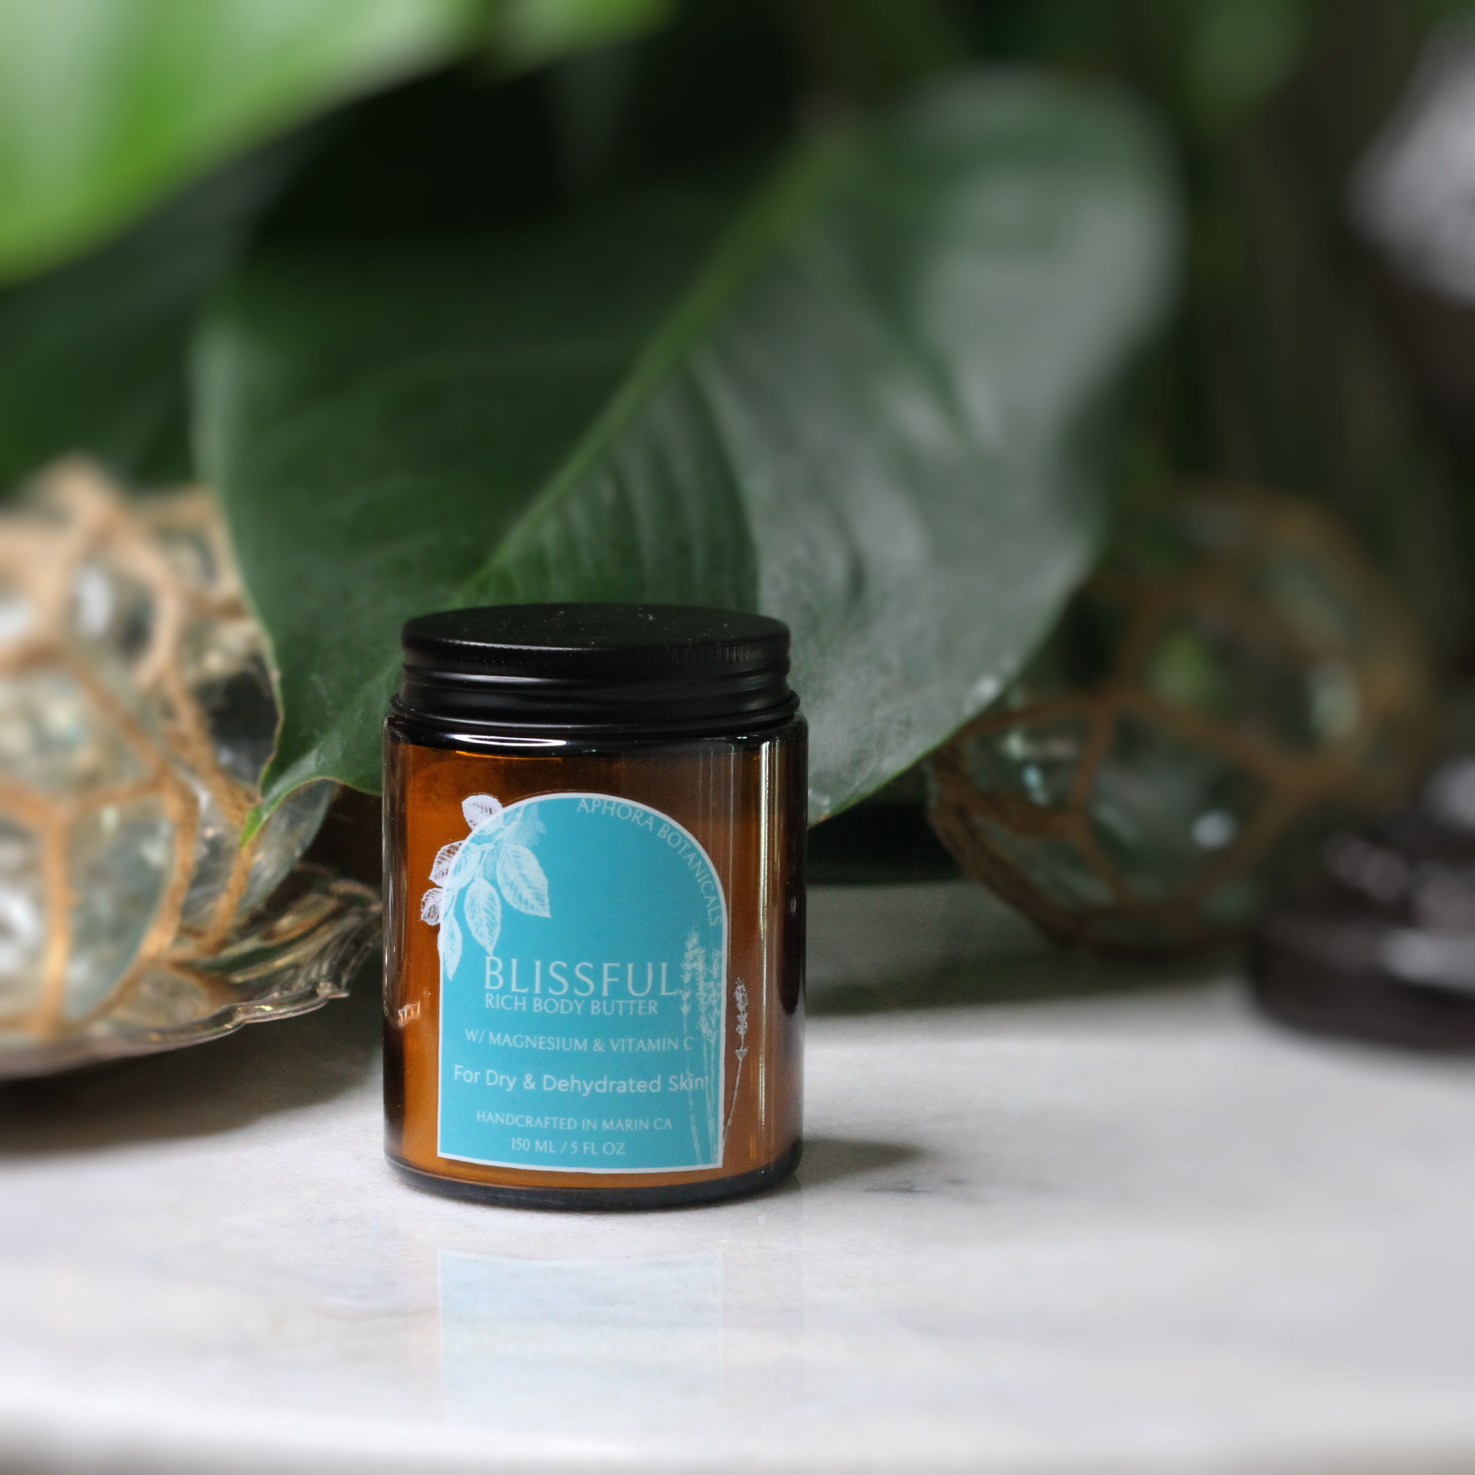 Blissful Rich Body Butter with Magnesium & Vitamin C - Aphora Botanicals